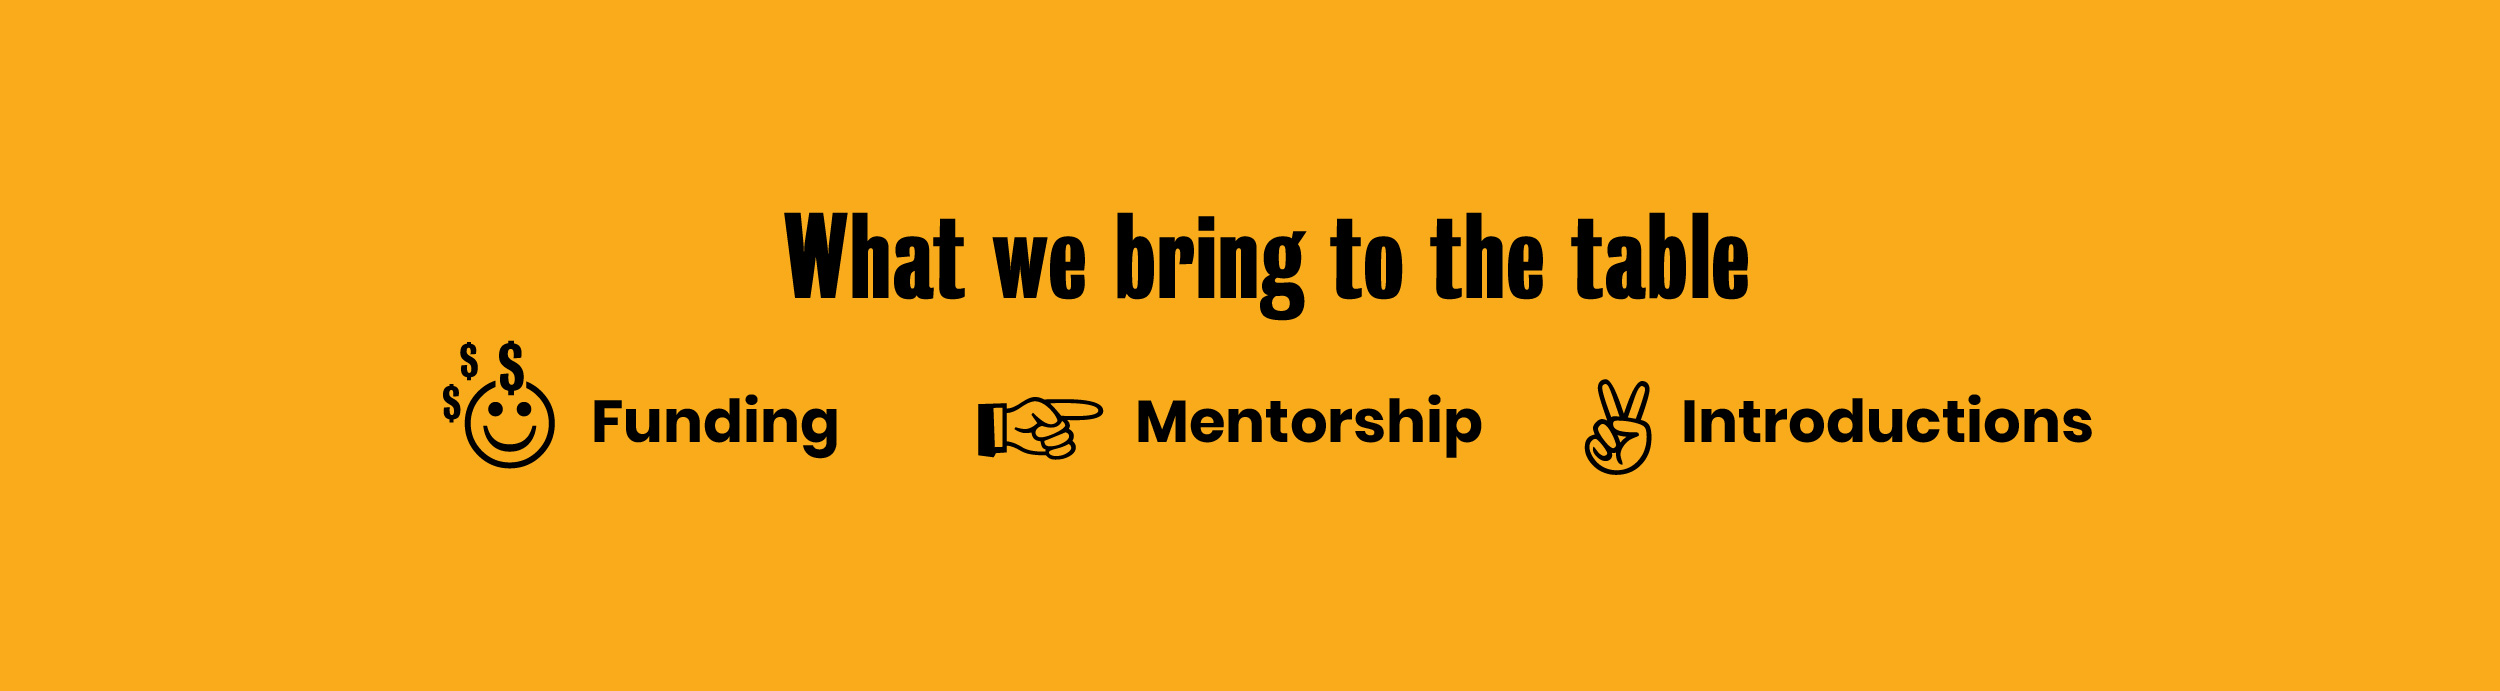 What we bring to the table: funding, mentorship, and introductions